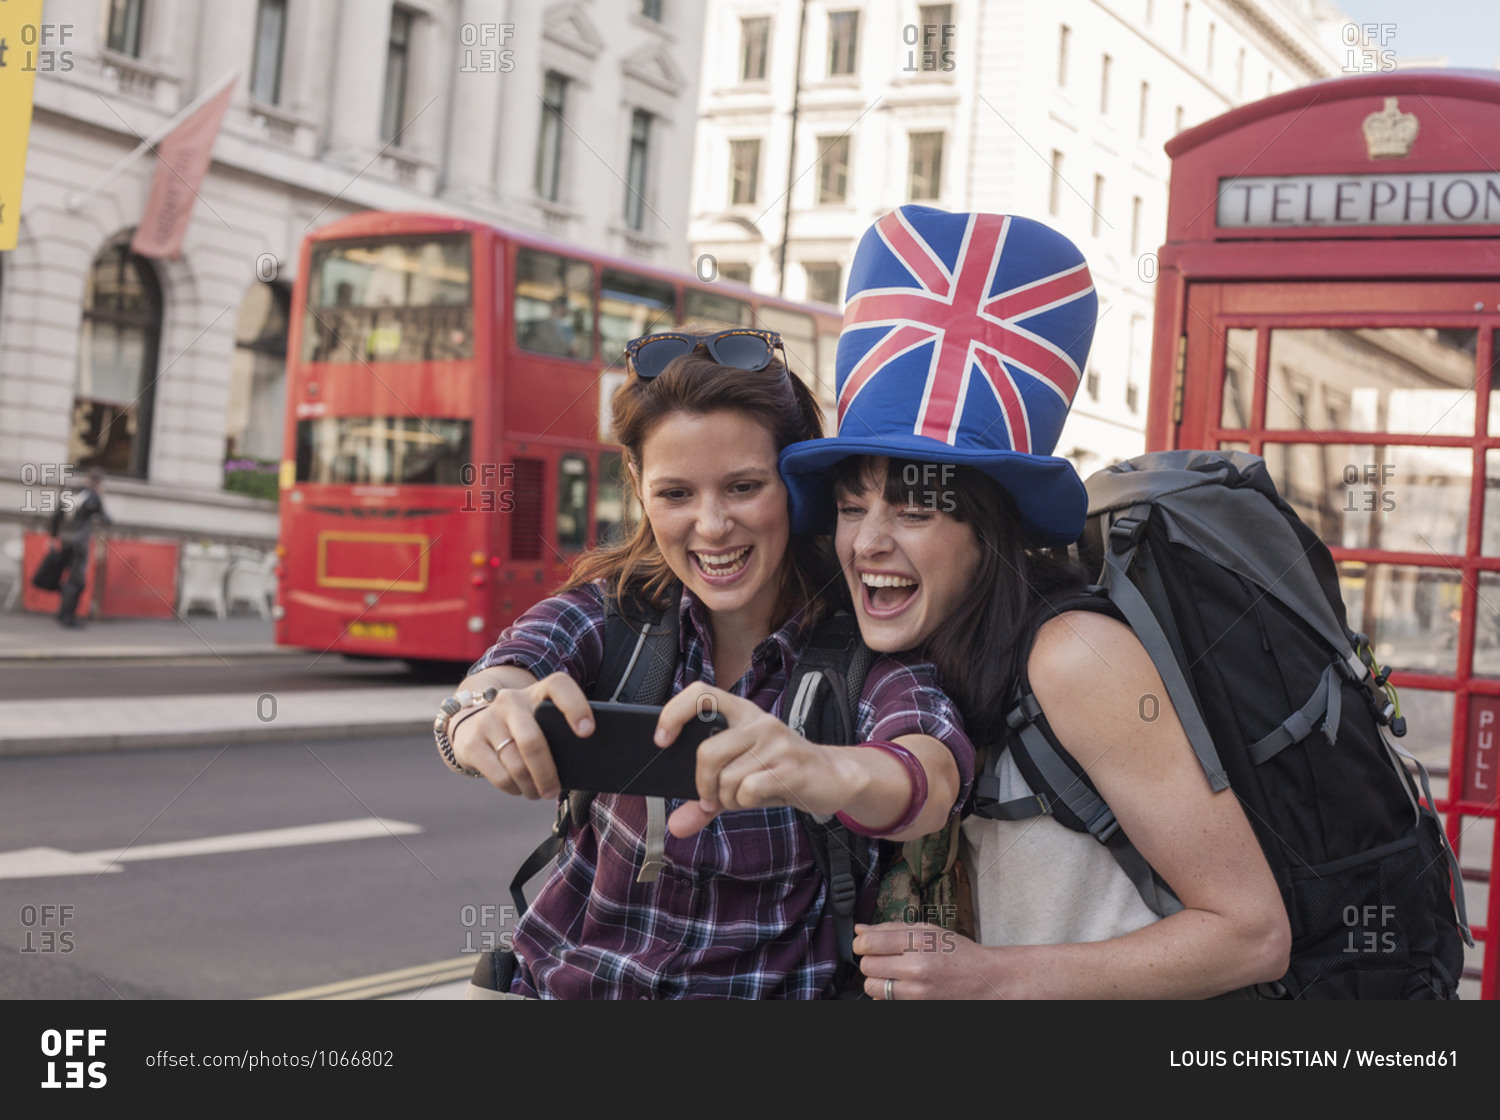 Happy woman taking selfie with friend wearing British flag hat against red telephone box in city